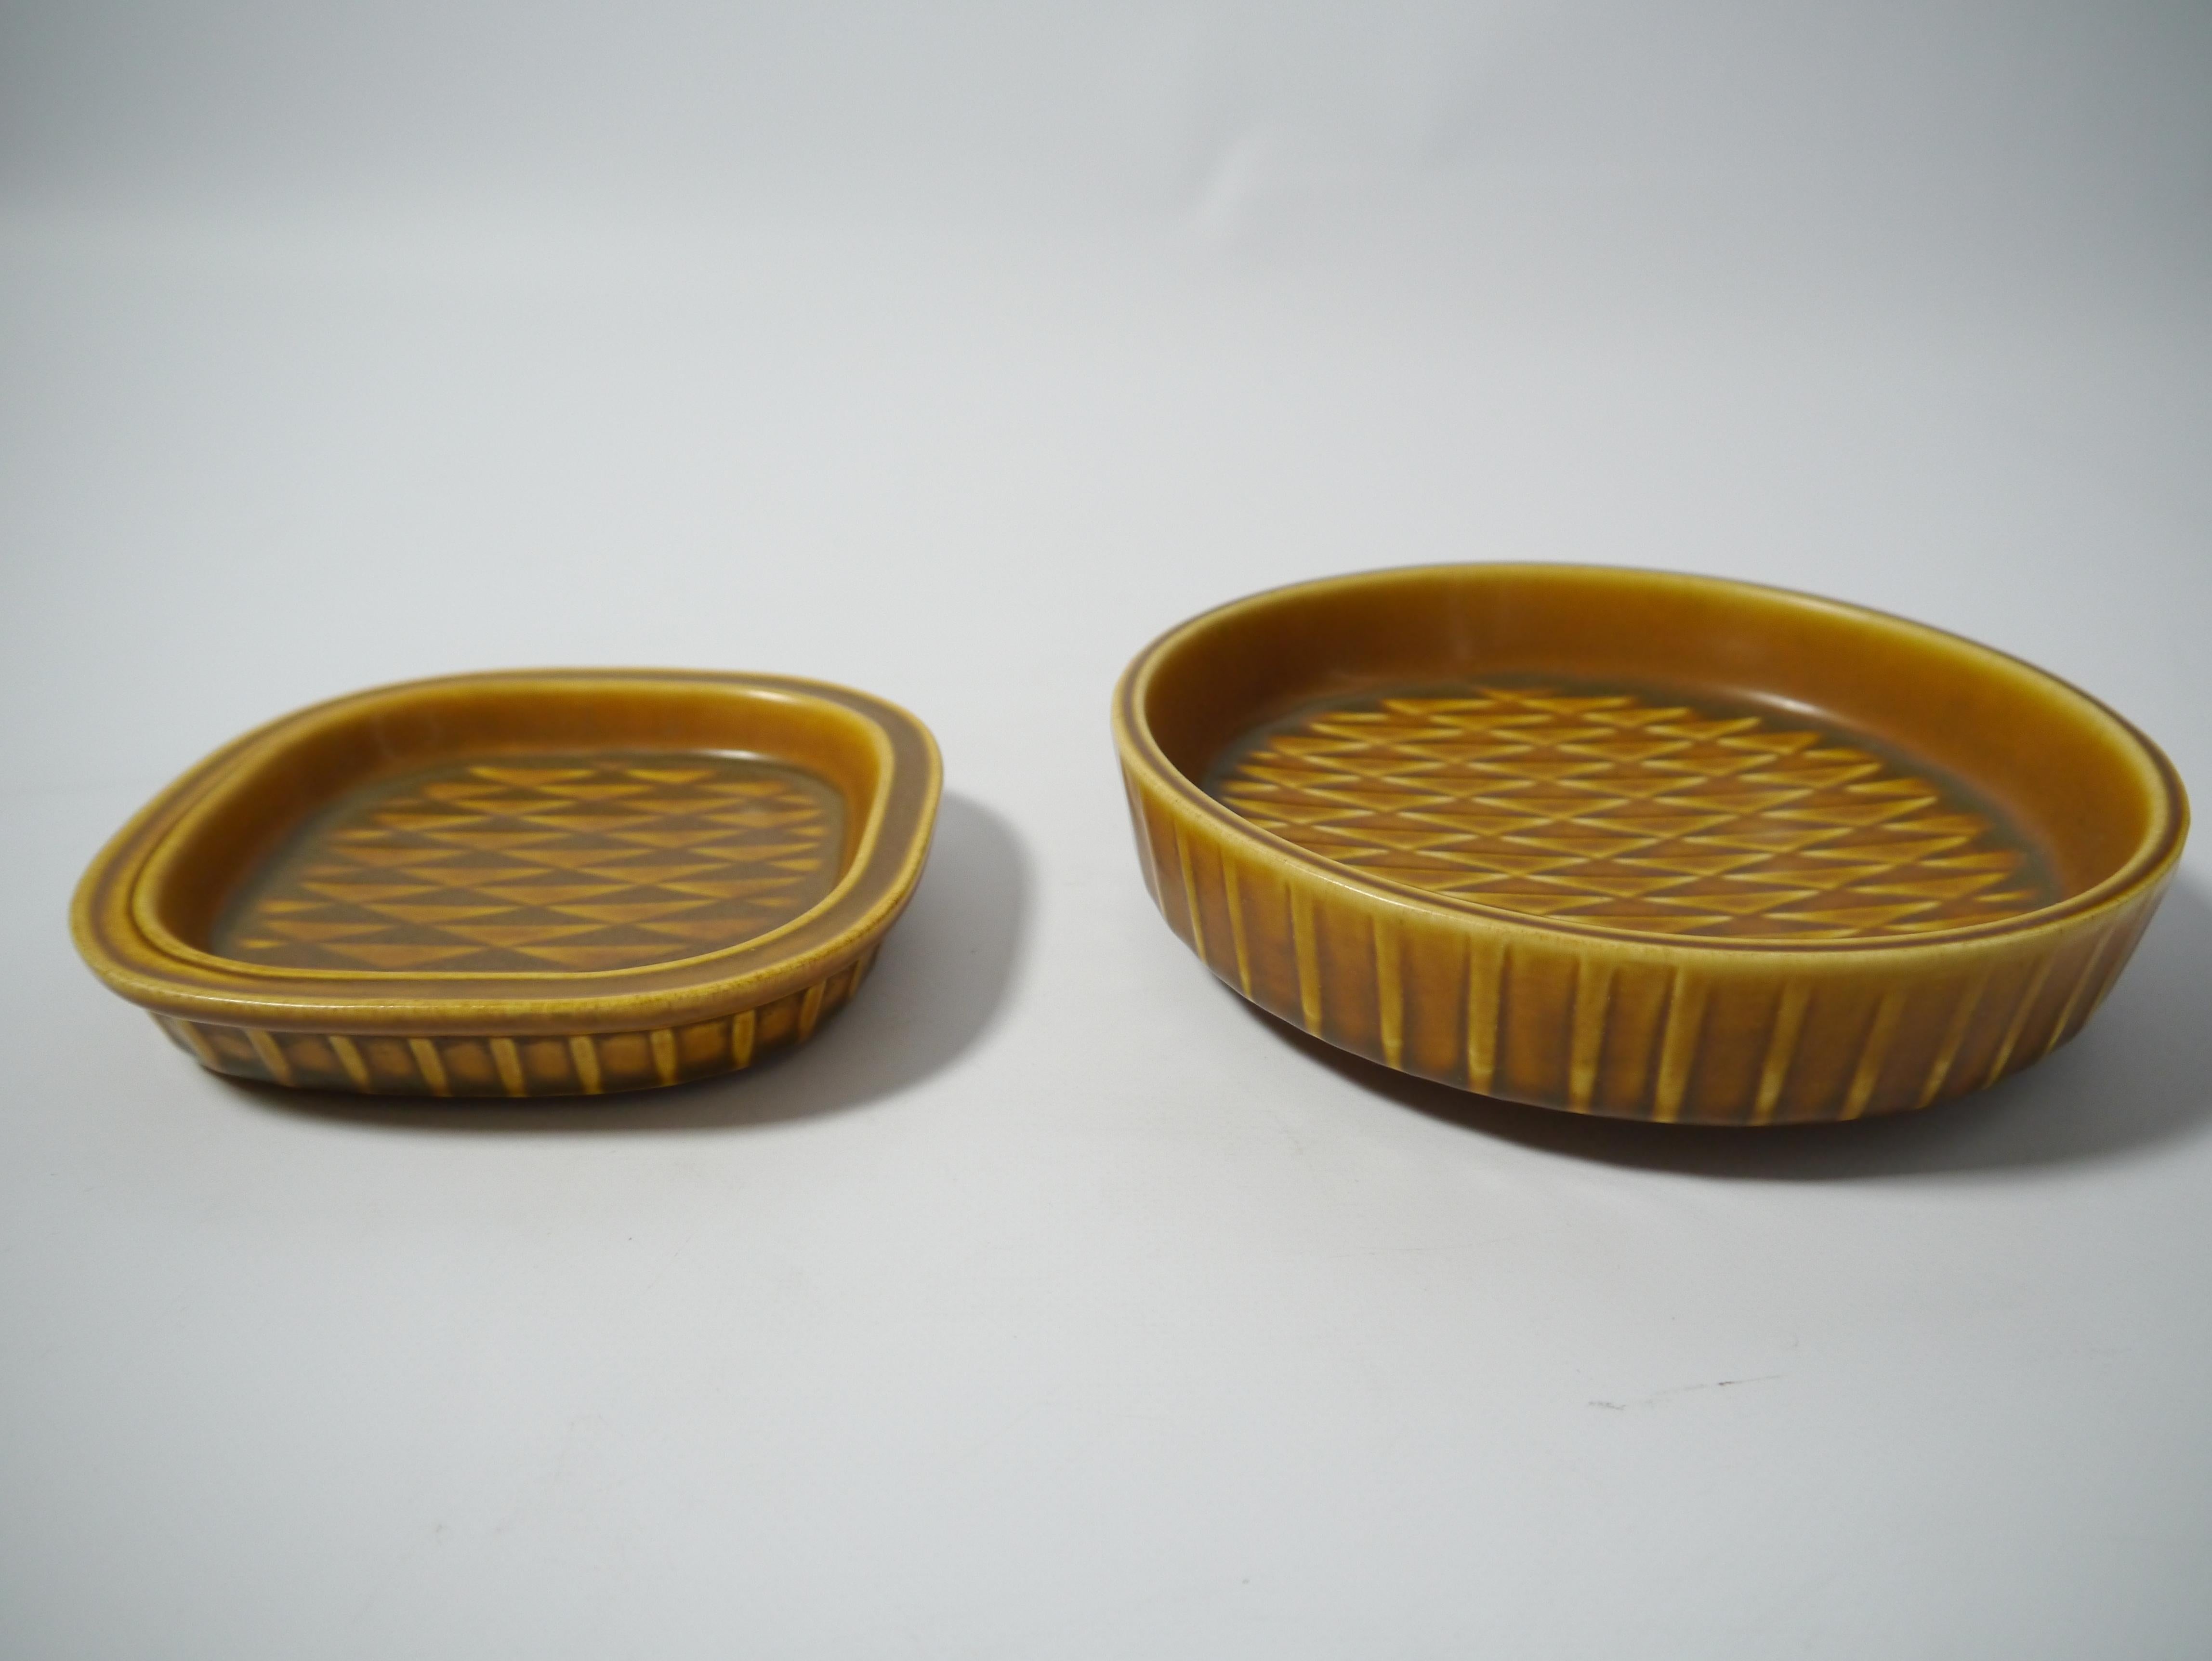 Two ceramic plates from the Eterna series, designed by Gunnar Nylund and fabricated by Rörstrand.